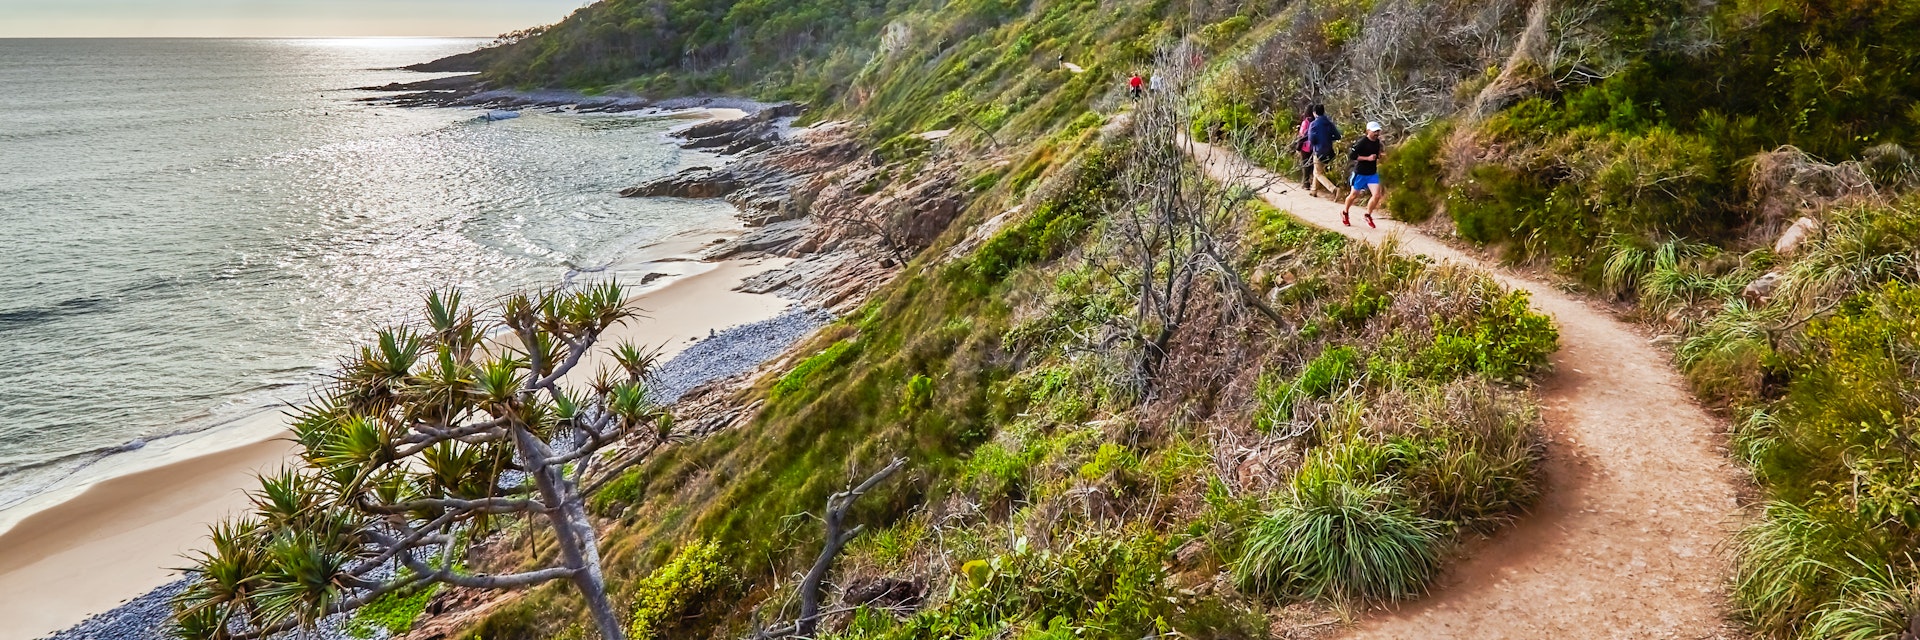 People walking the Coast Track in Noosa National Park.
